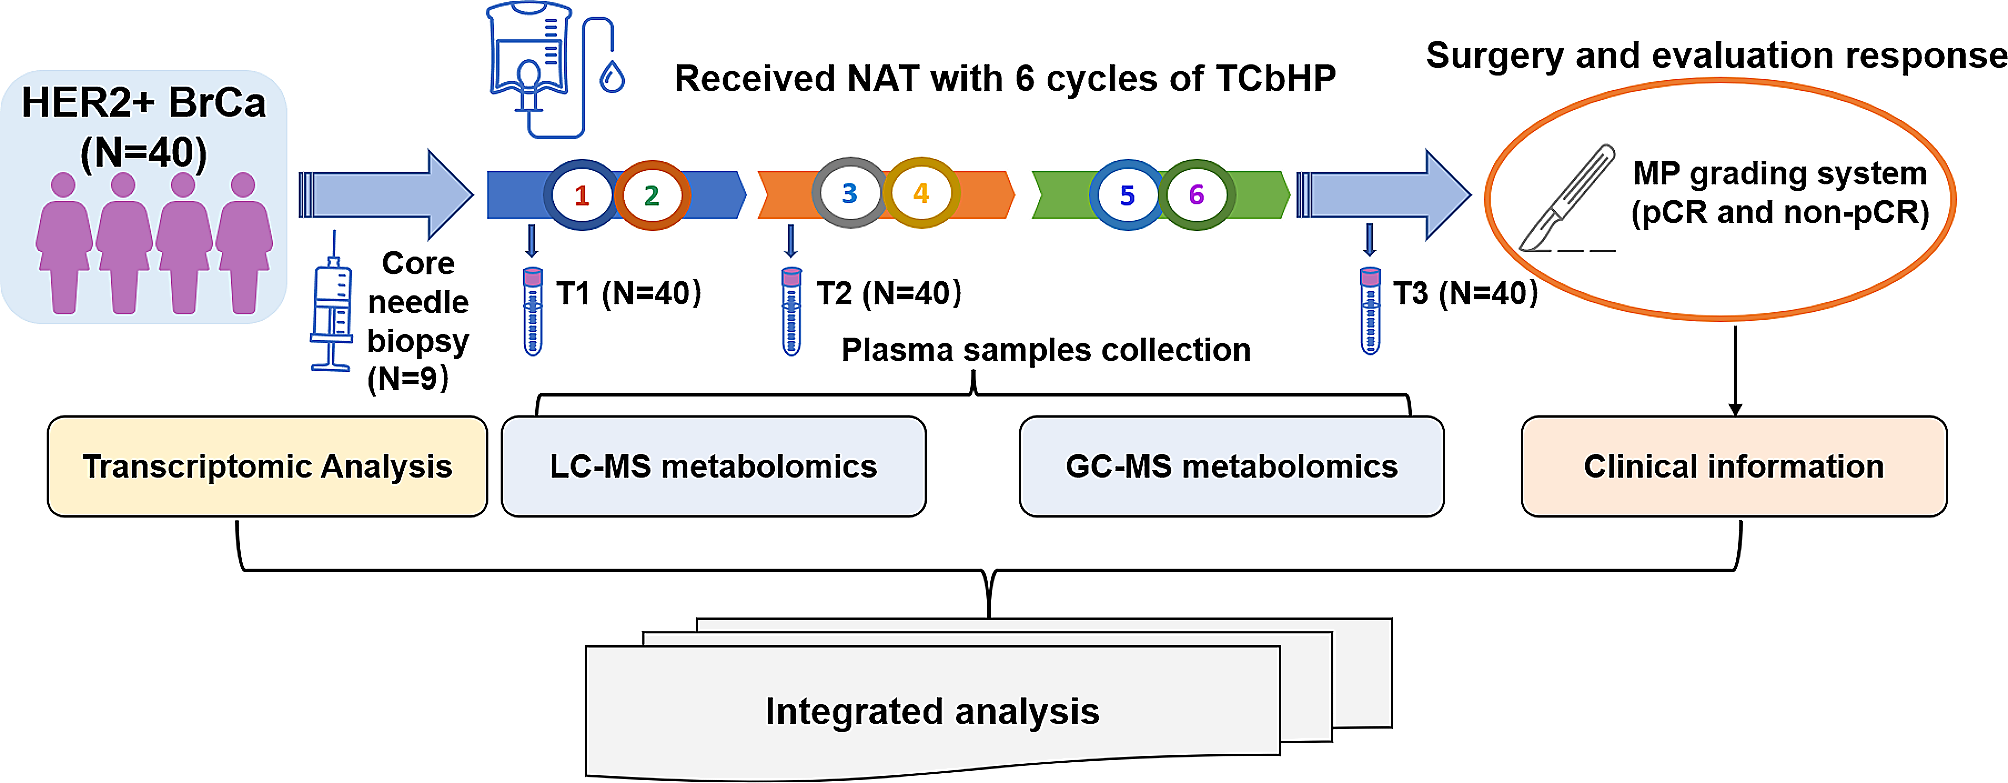 Metabolomics assisted by transcriptomics analysis to reveal metabolic characteristics and potential biomarkers associated with treatment response of neoadjuvant therapy with TCbHP regimen in HER2 + breast cancer